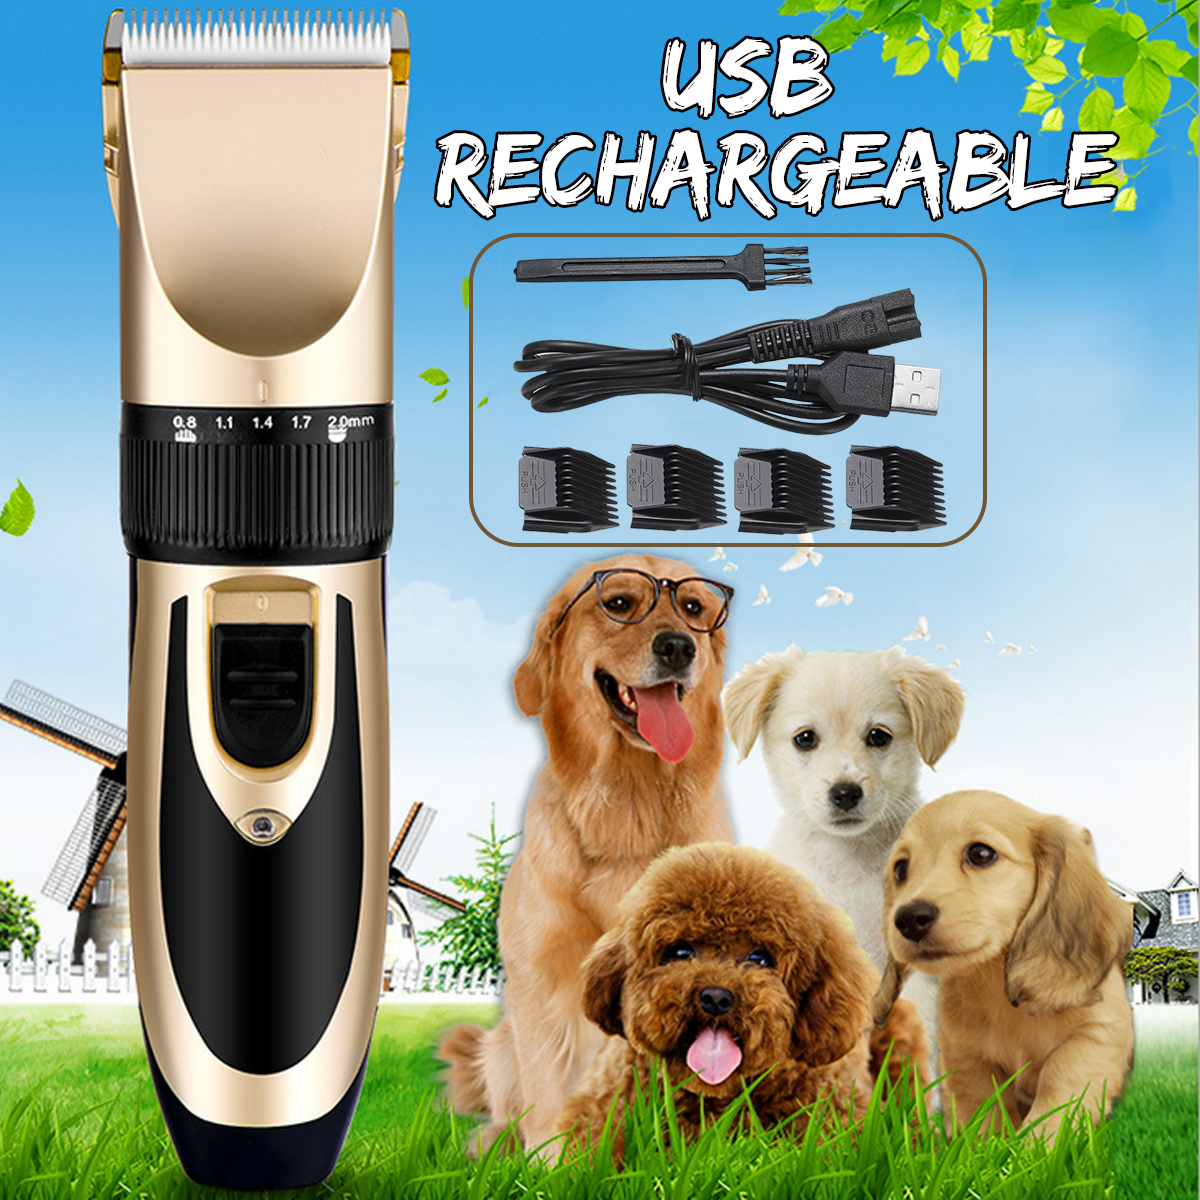 USA-DIRECT-USB-Rechargeable-Pet-Hair-Clipper-Cat-Dog-Trimmer-Kit-Pet-Grooming-Scissor-Portable-Pet-A-1423805-1